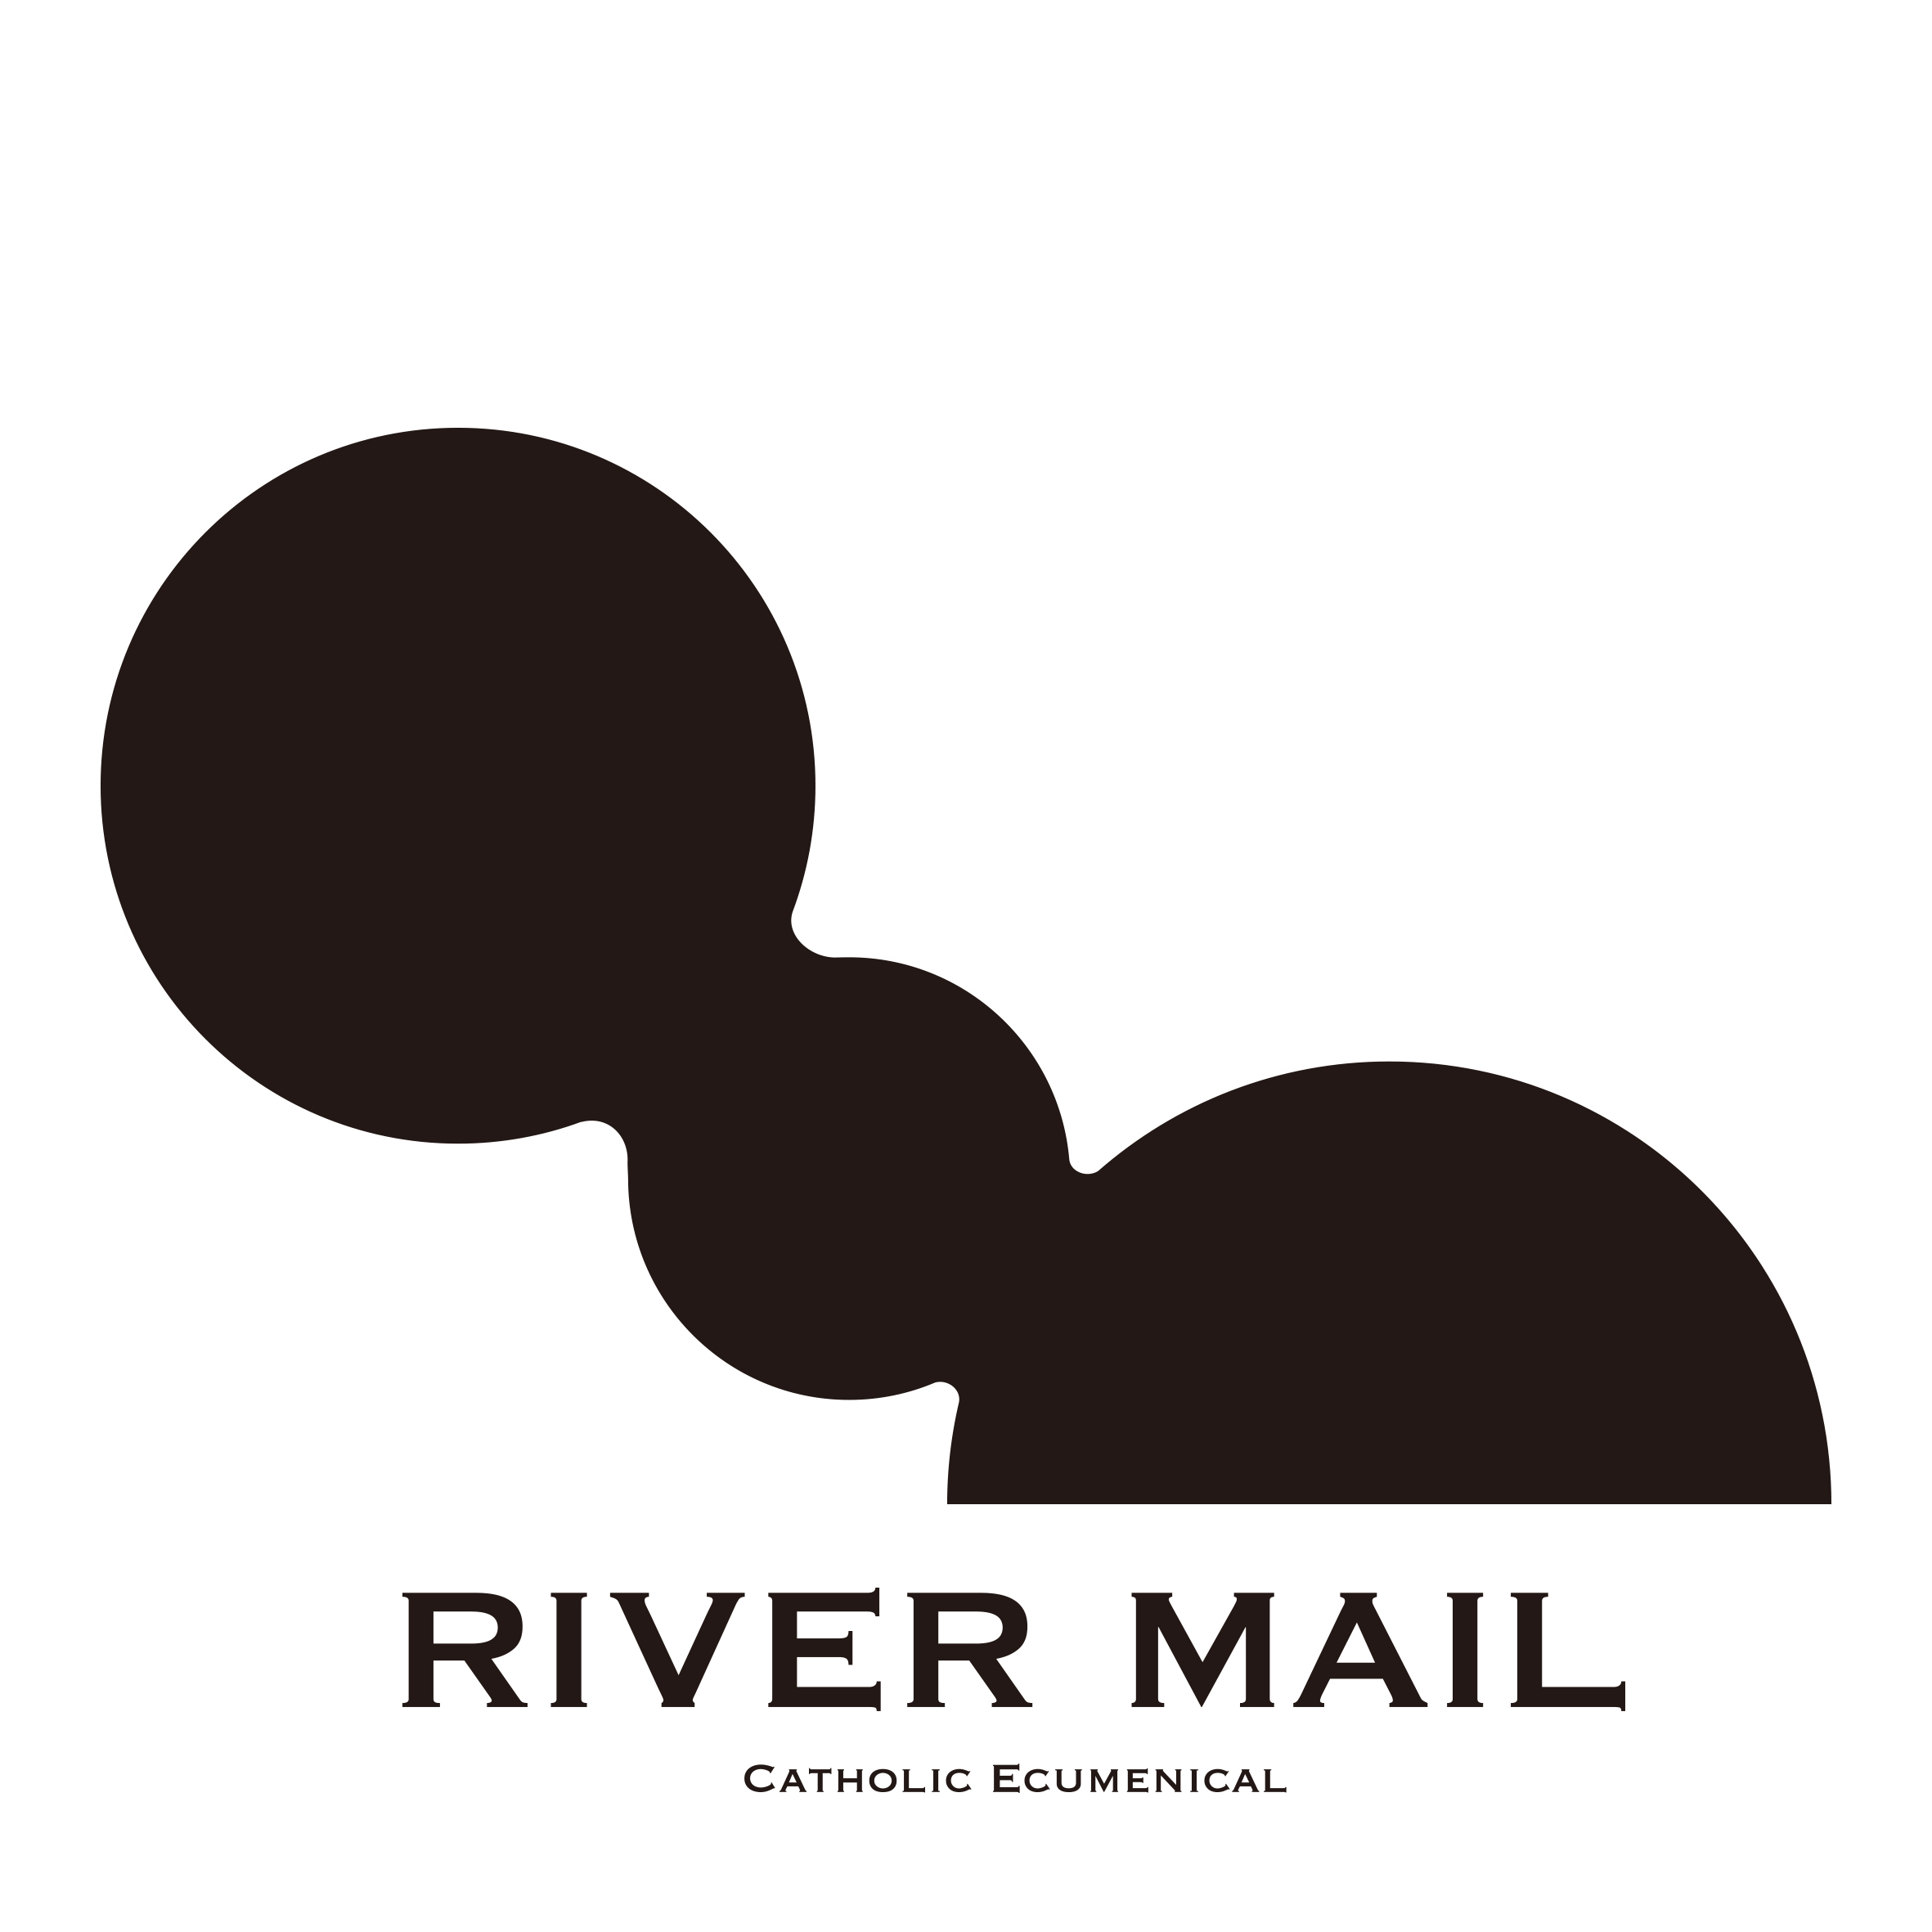 ＲIVER MAIL